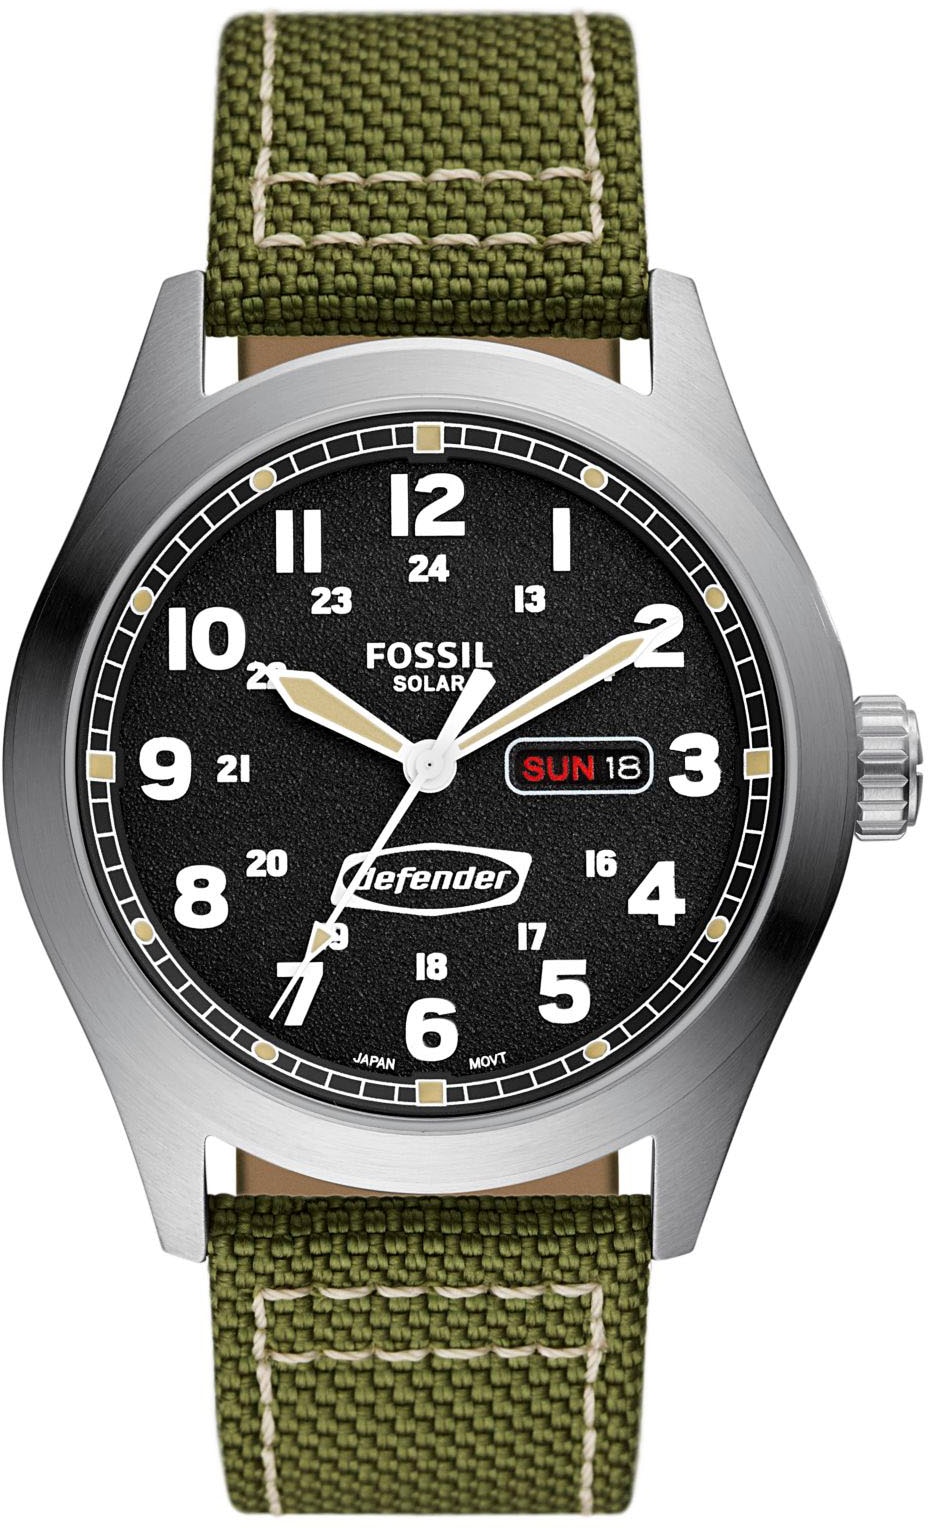 Fossil Solaruhr »DEFENDER, FS5977«, limited edition online shoppen bei OTTO